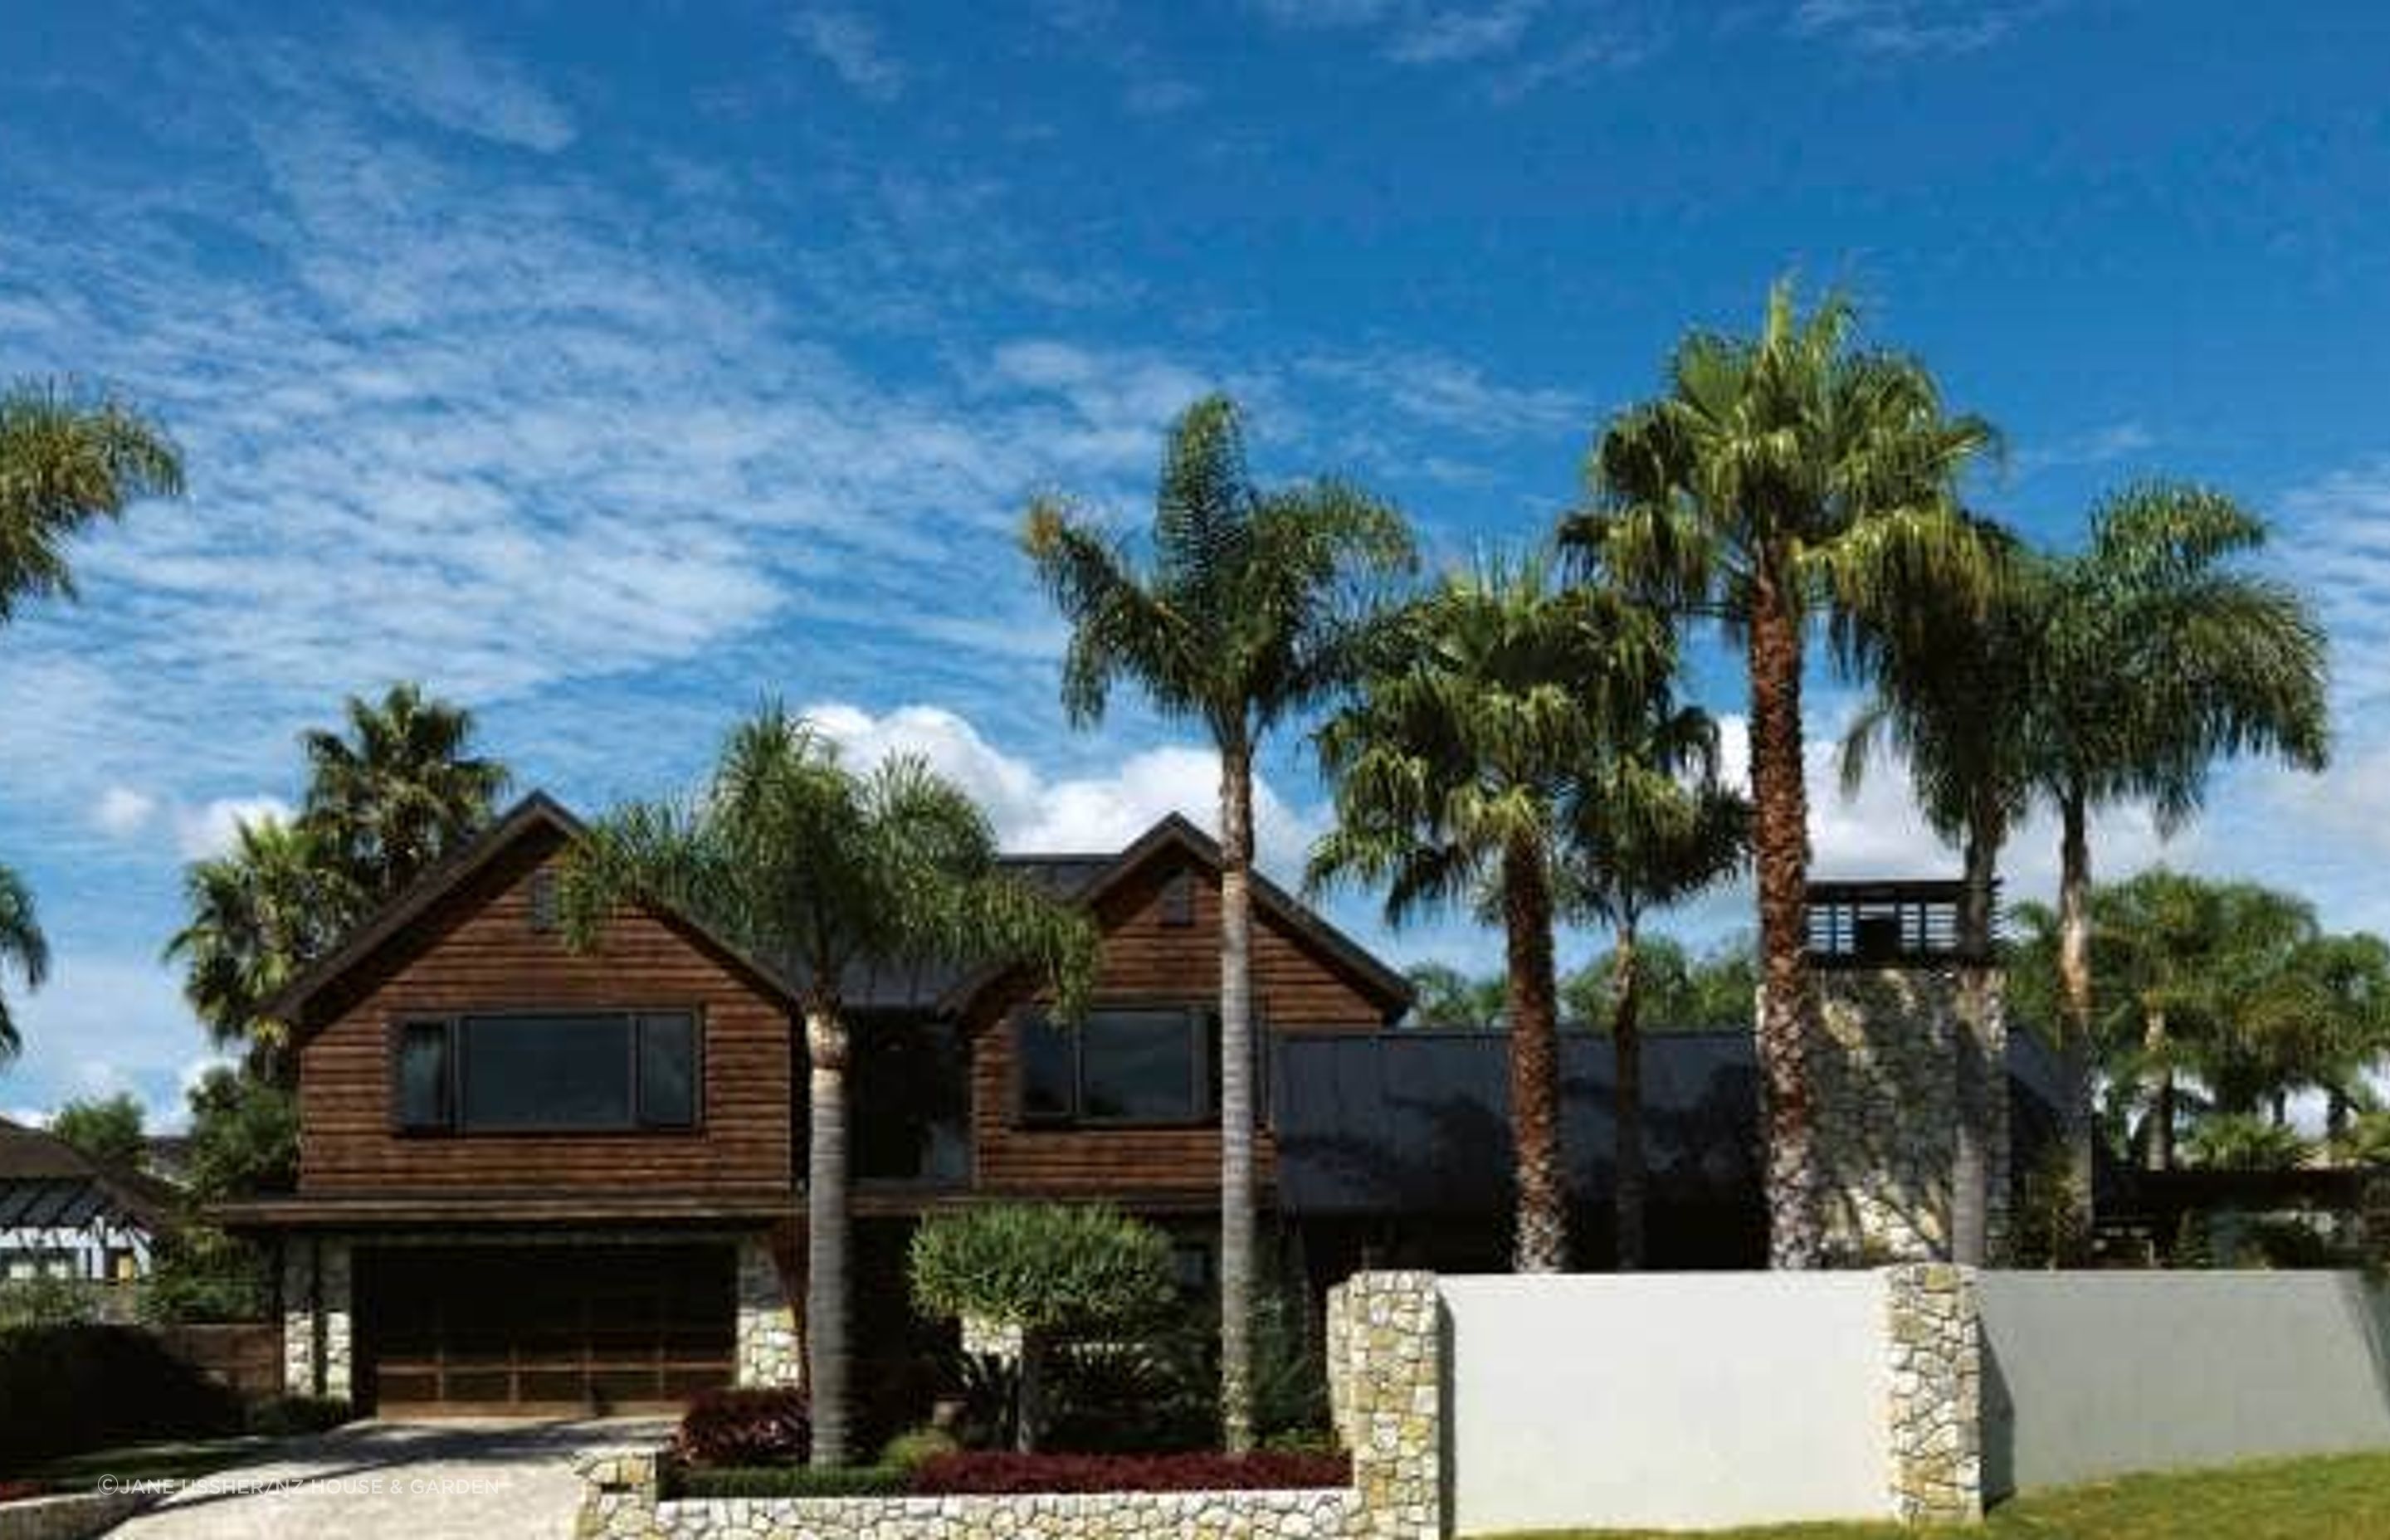 Existing palms add a mature touch to the garden while cedar cladding and Te Kuiti limestone were chosen for their natural earthy feel; the driveway was resurfaced using pebble-covered sheets from Island Stone.